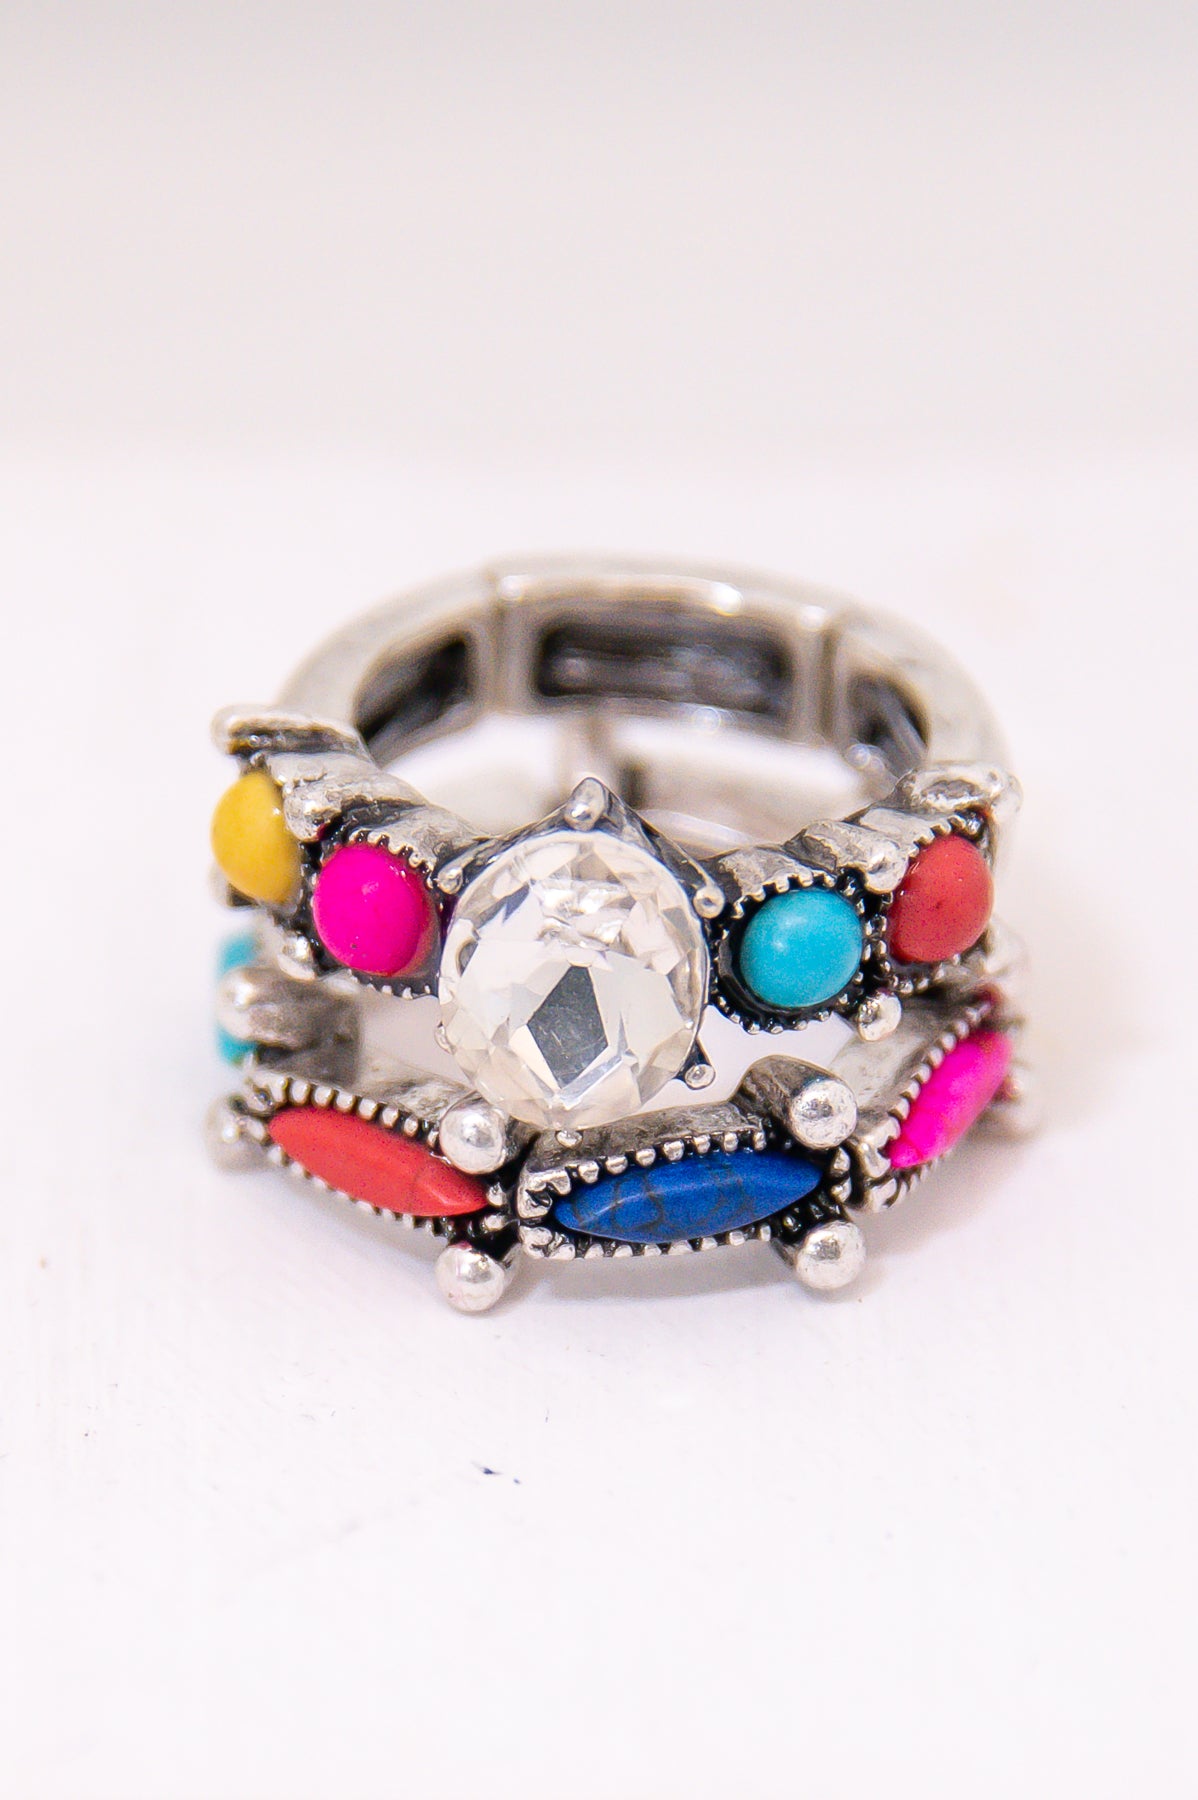 Multi Color/Silver Stone/Bling Stretch Rings (2-Piece Set) - RNG1107MU